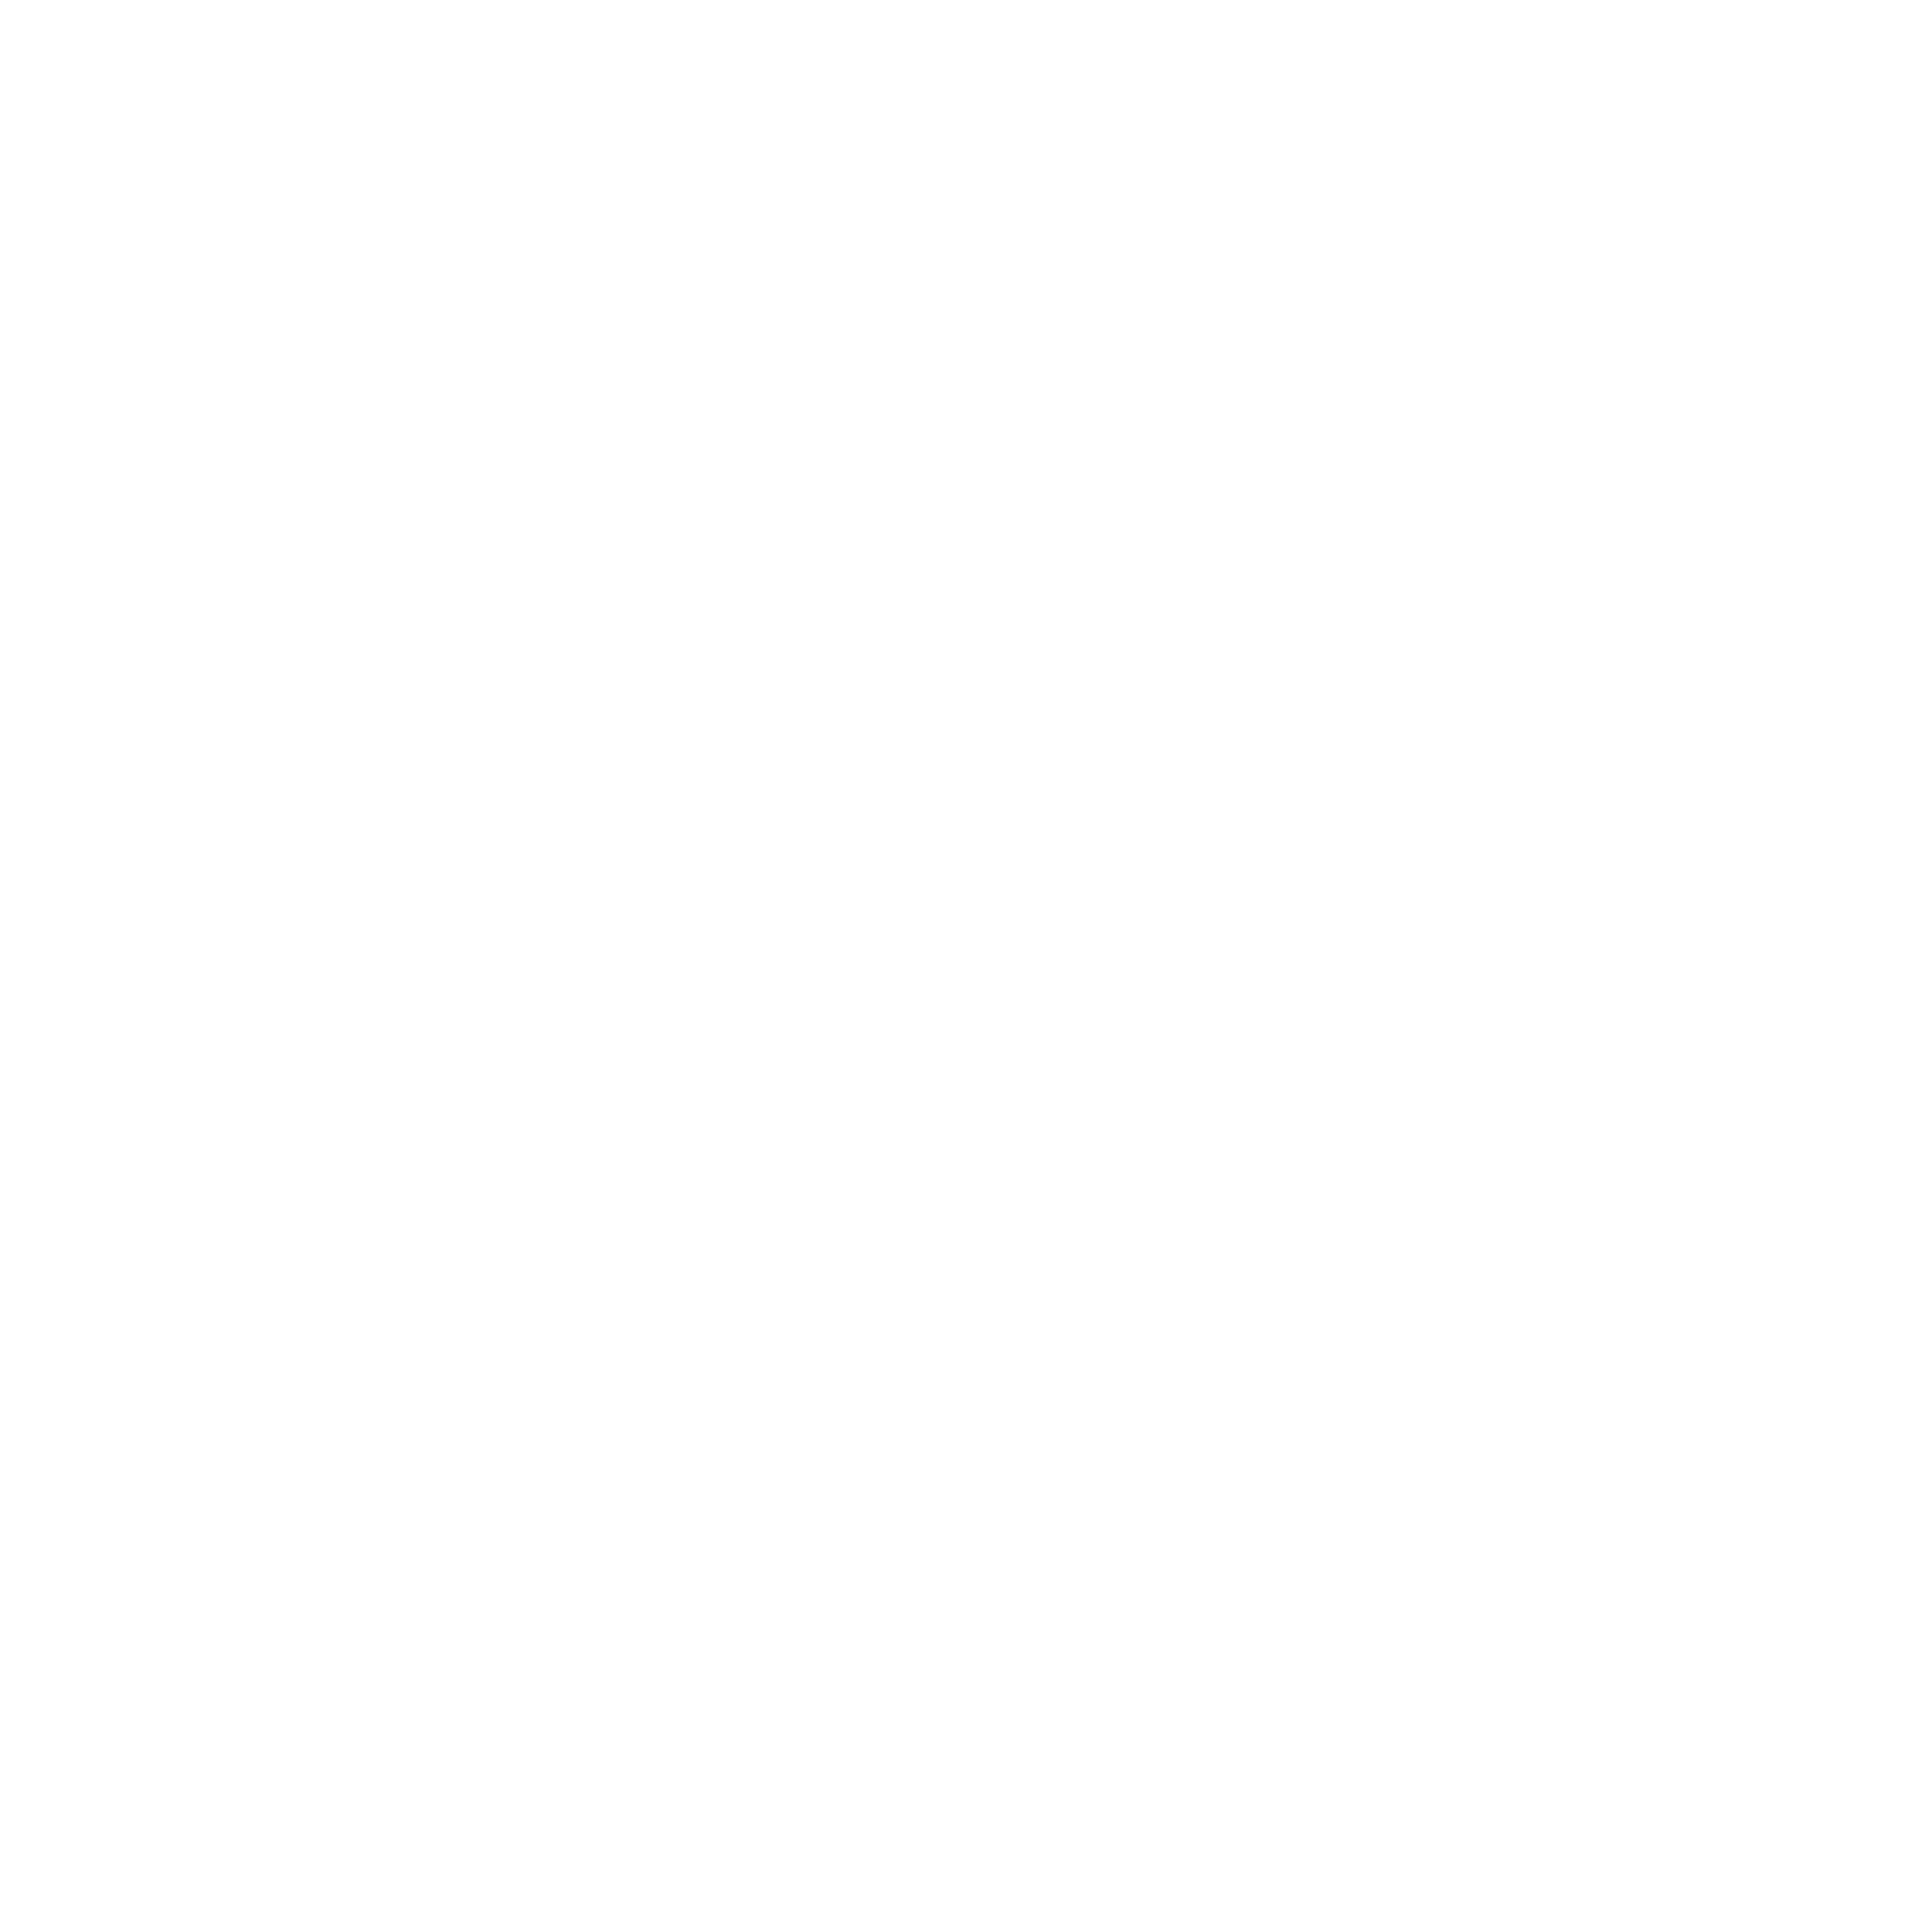 Quantock is a full-service marketing agency in Somerset delivering transformative change through the power of creativity.